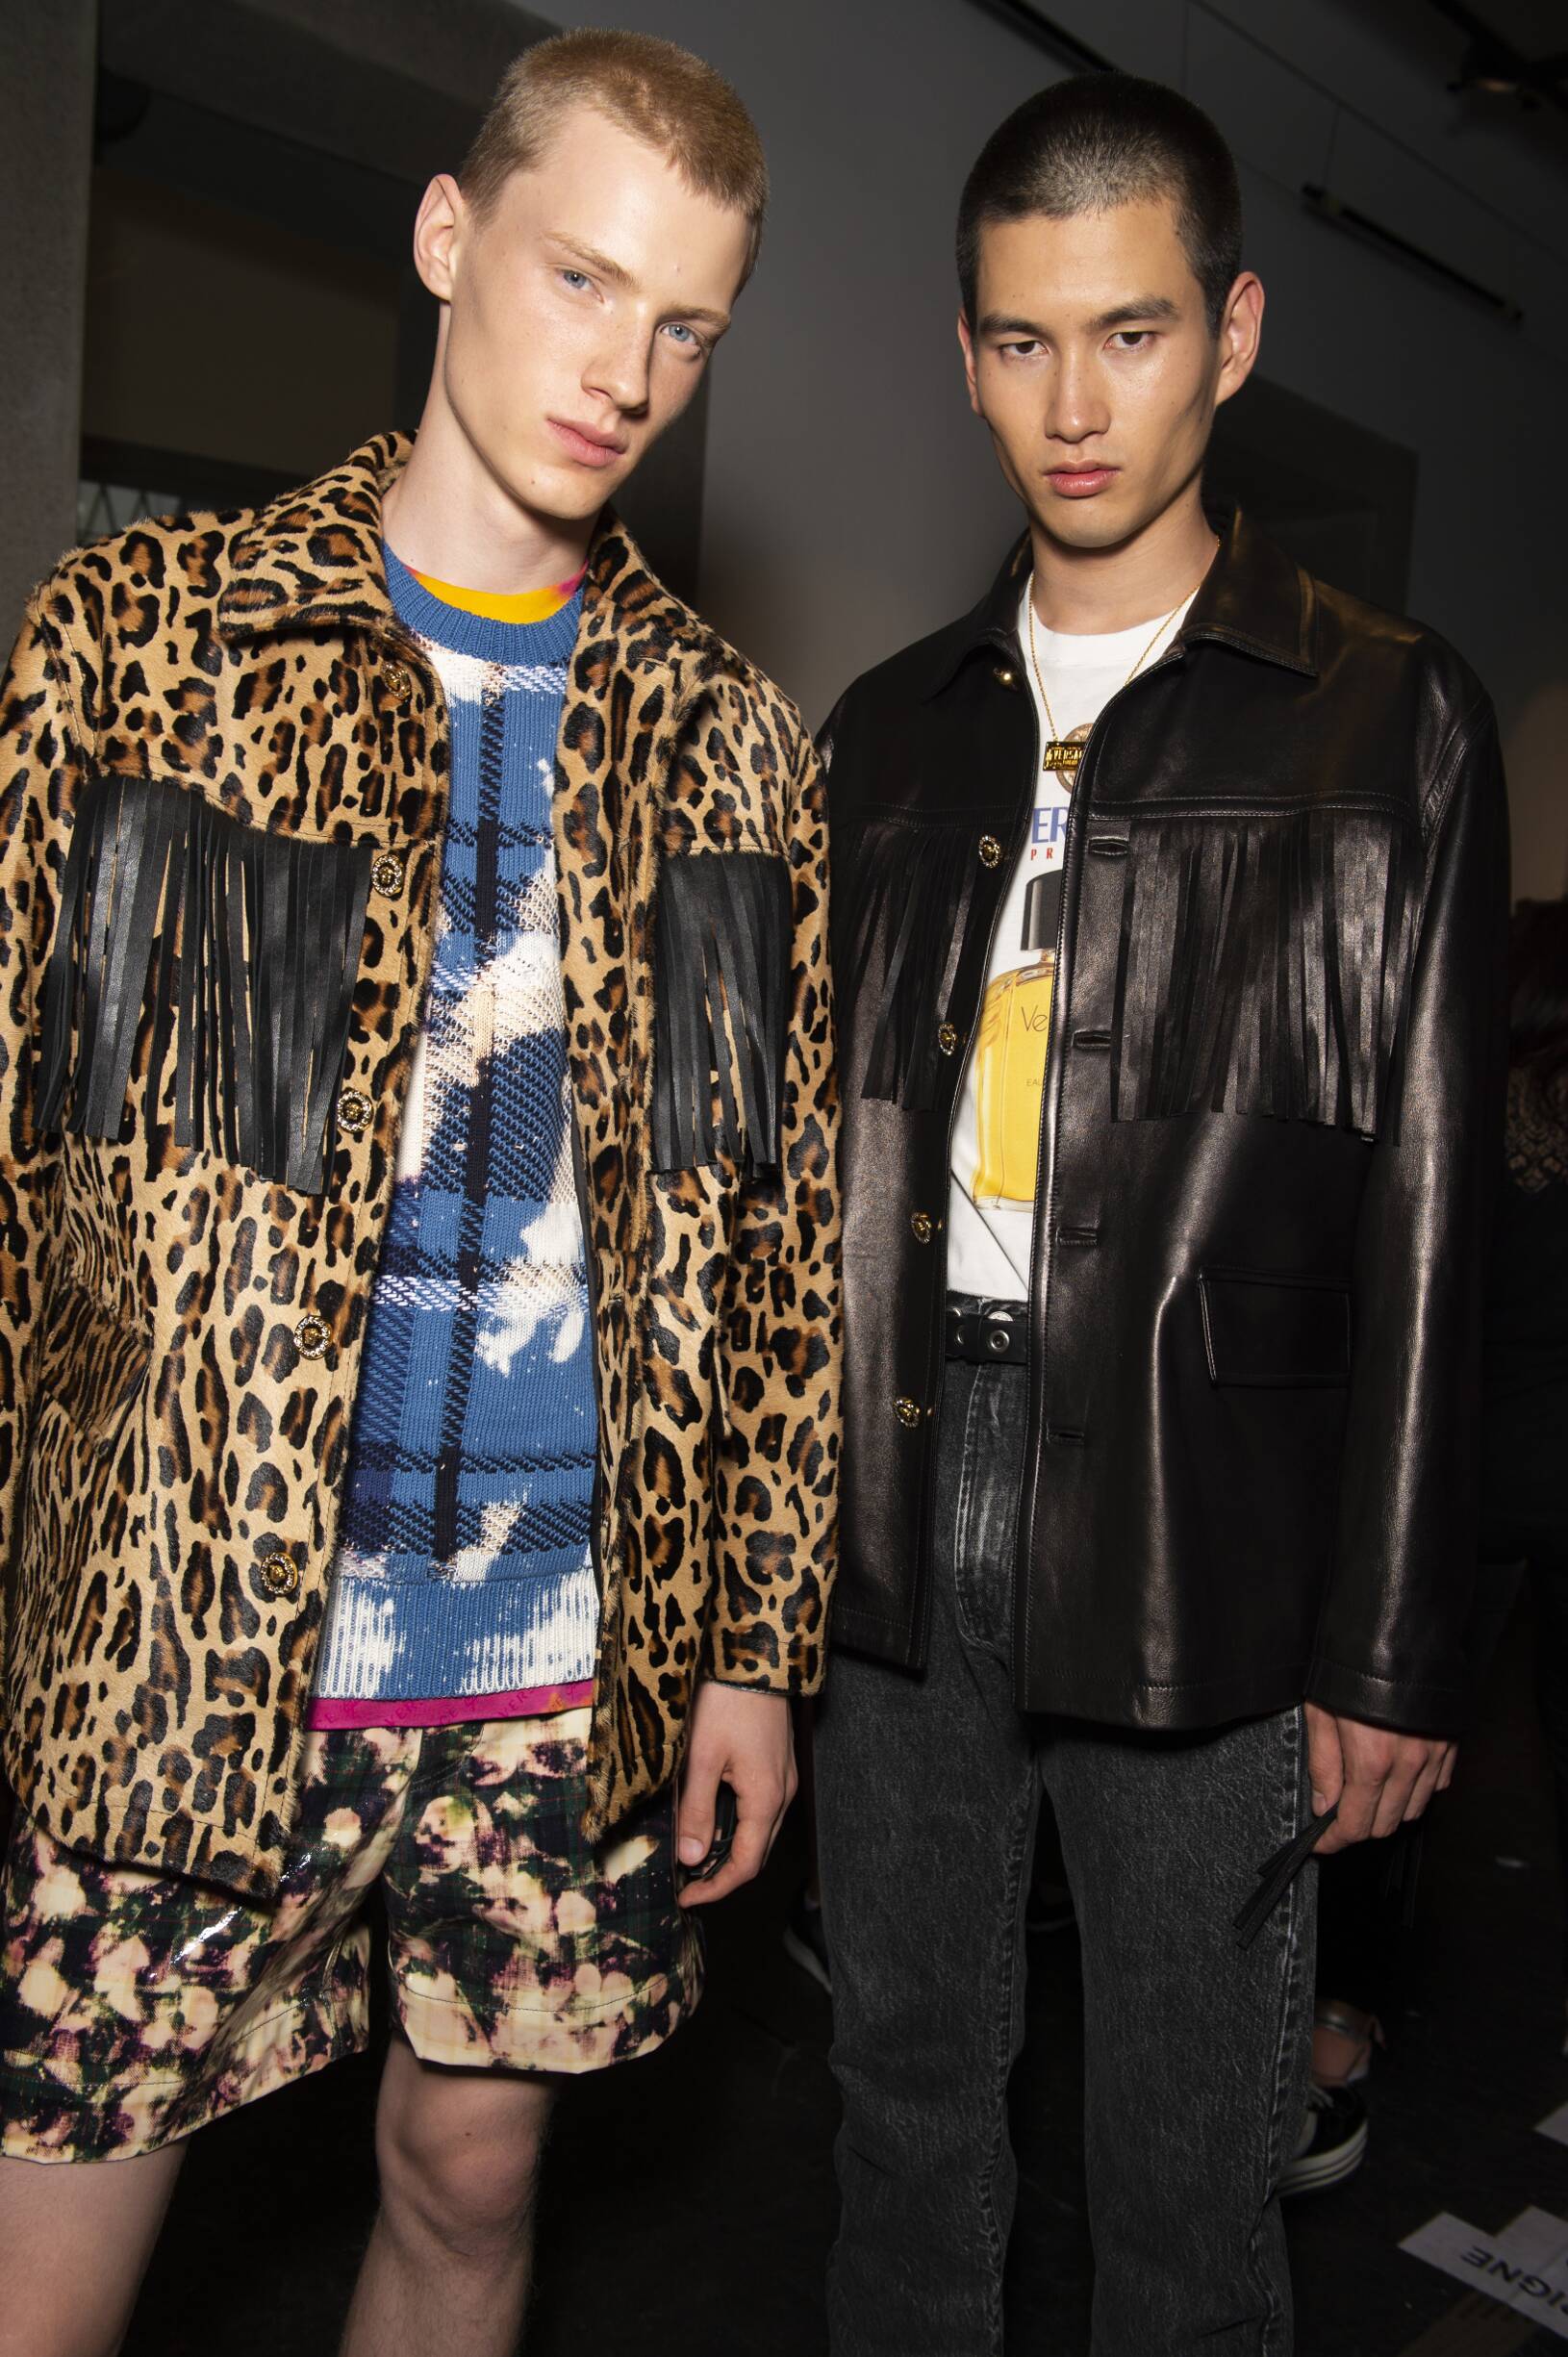 BACKSTAGE VERSACE 2020 SS MEN’S COLLECTION | The Skinny Beep